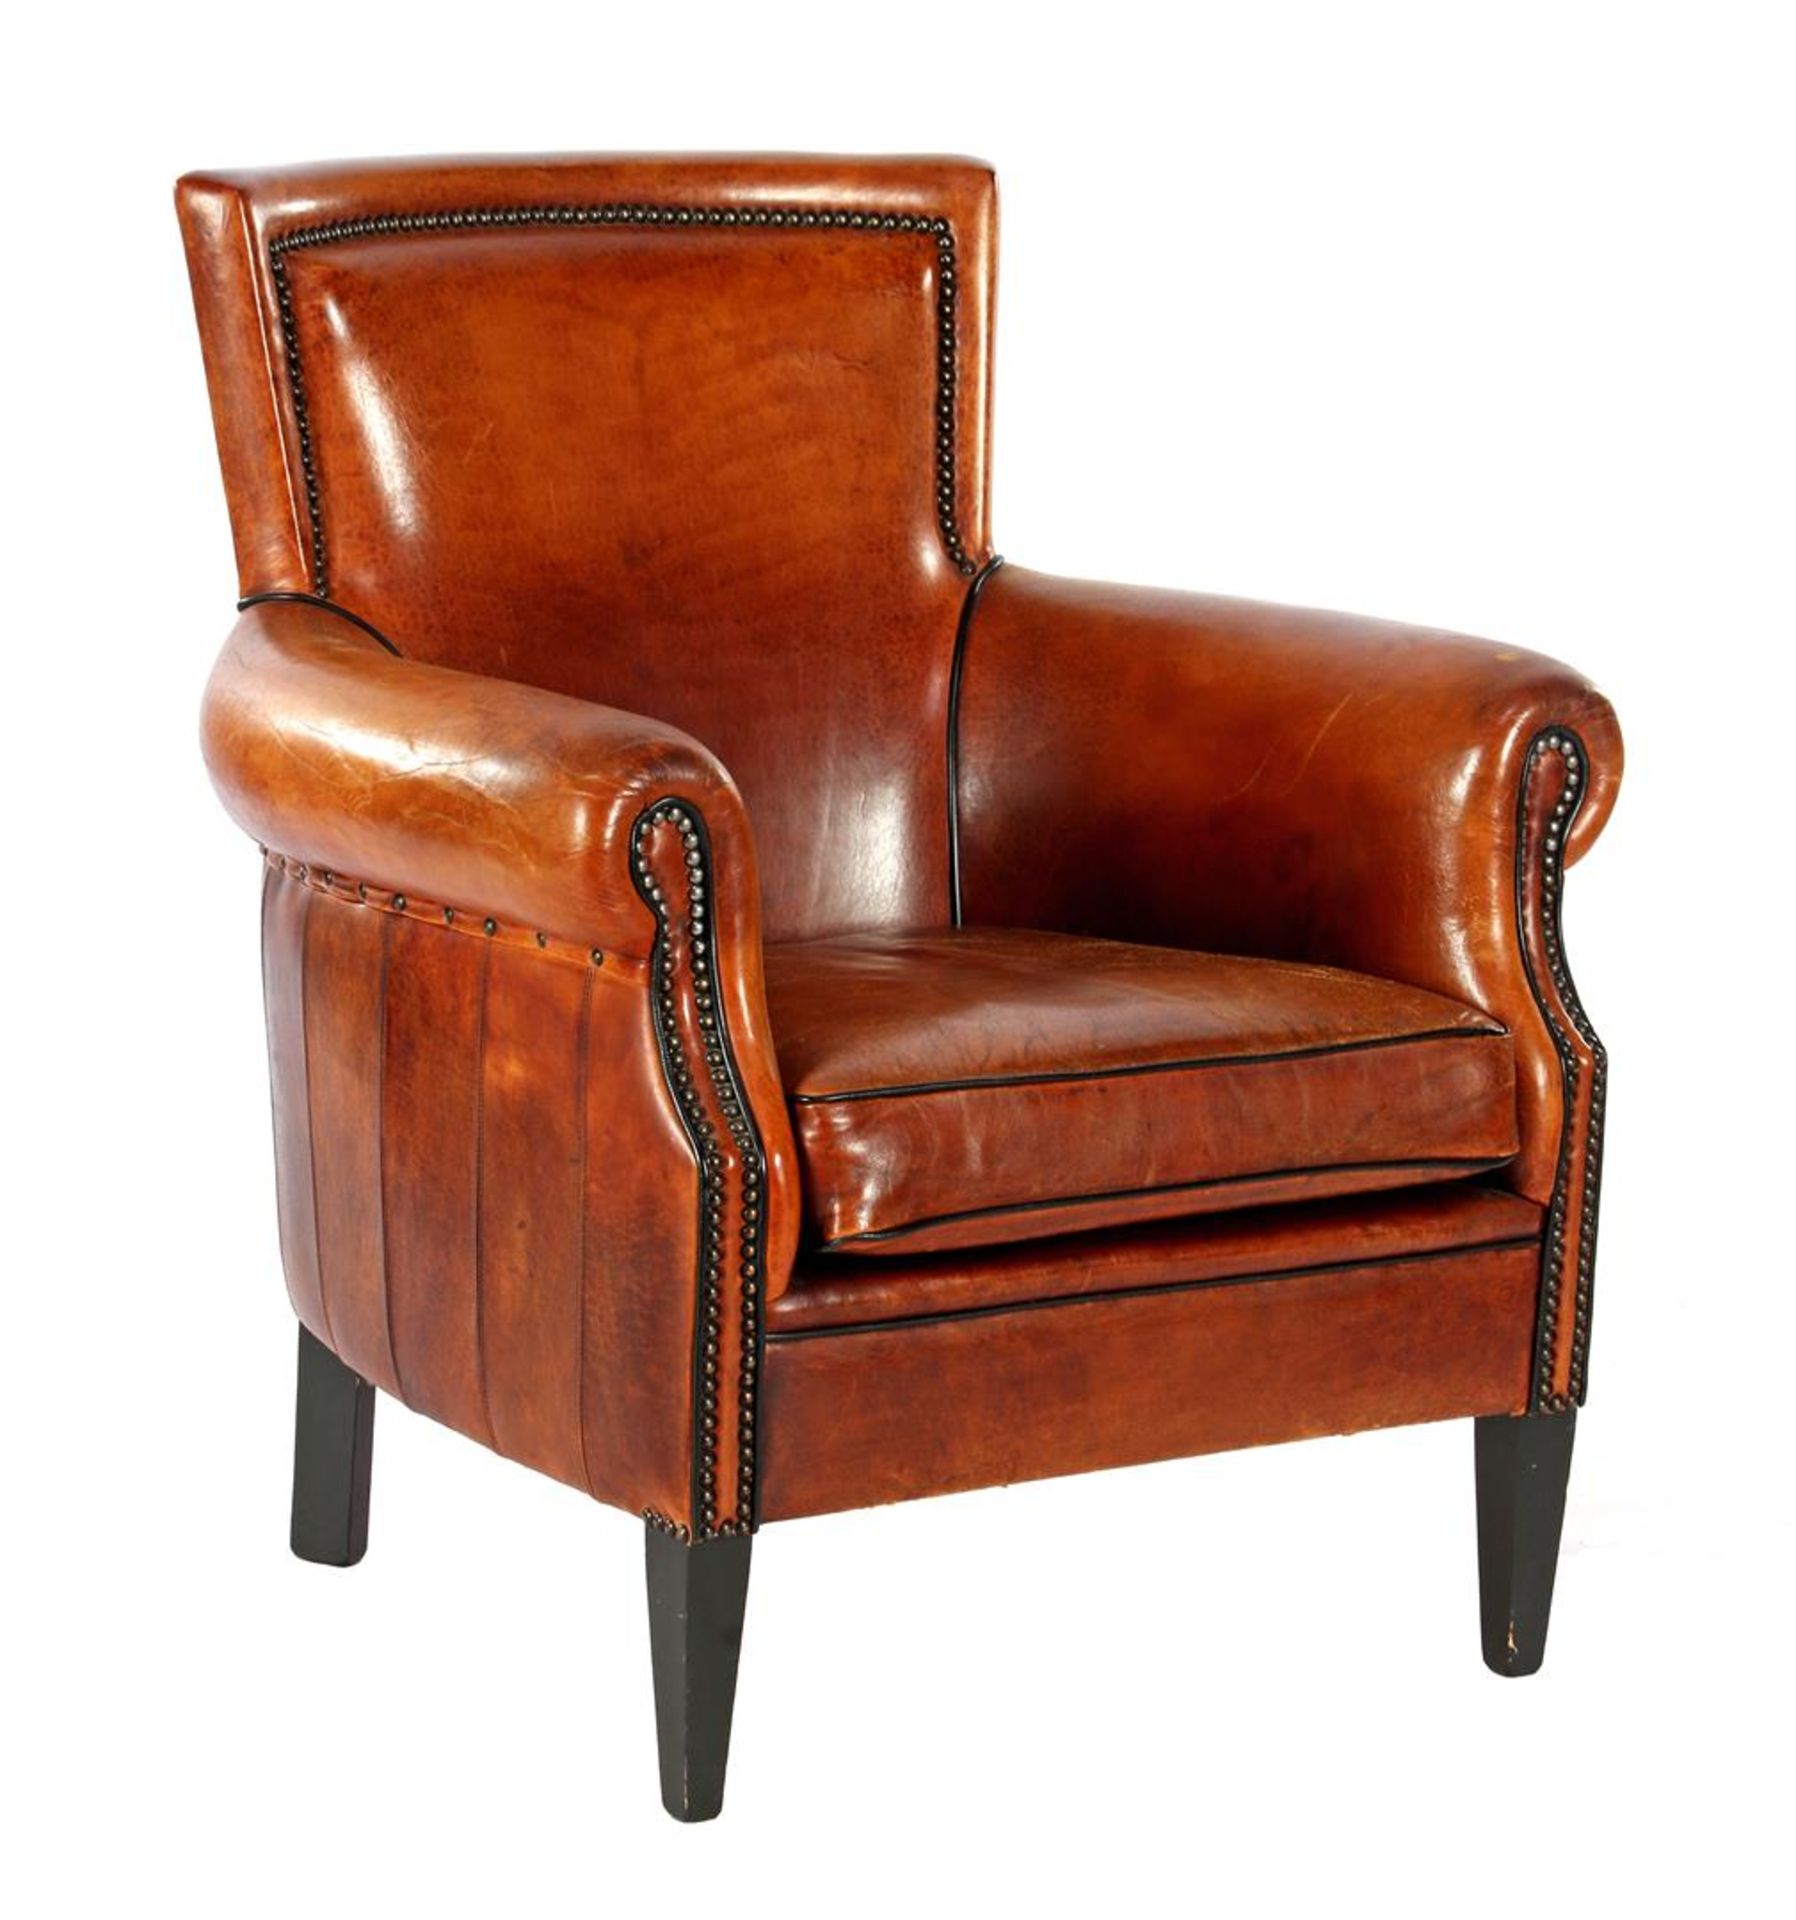 Leather armchair with black edges and copper tacks finished